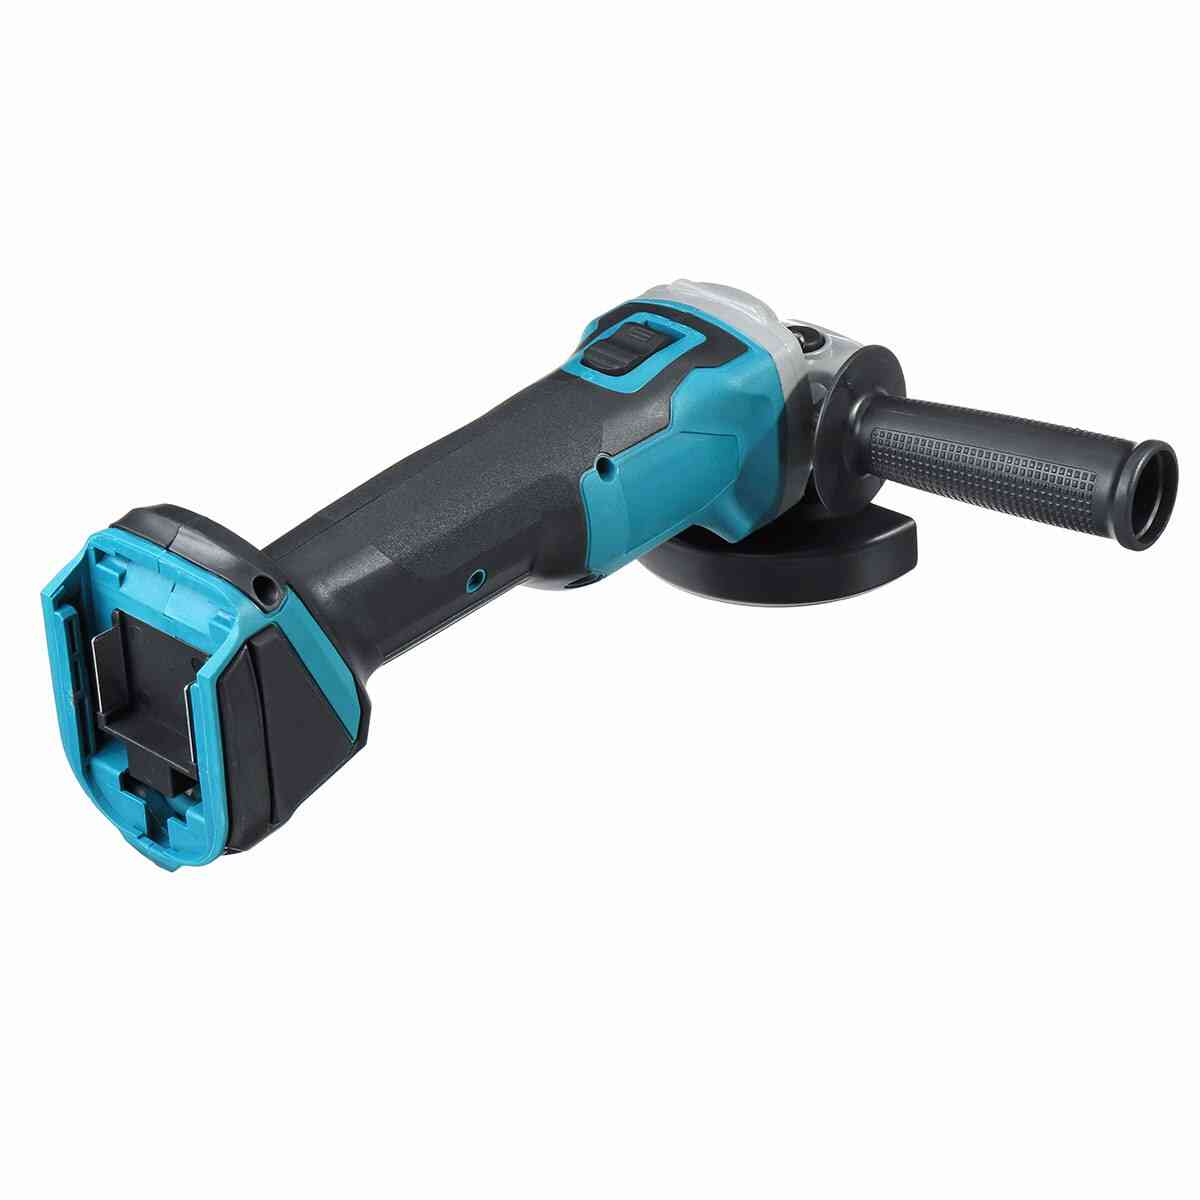 Electric Brushless- Cordless Angle Grinder, Power Cutting Machine Tools